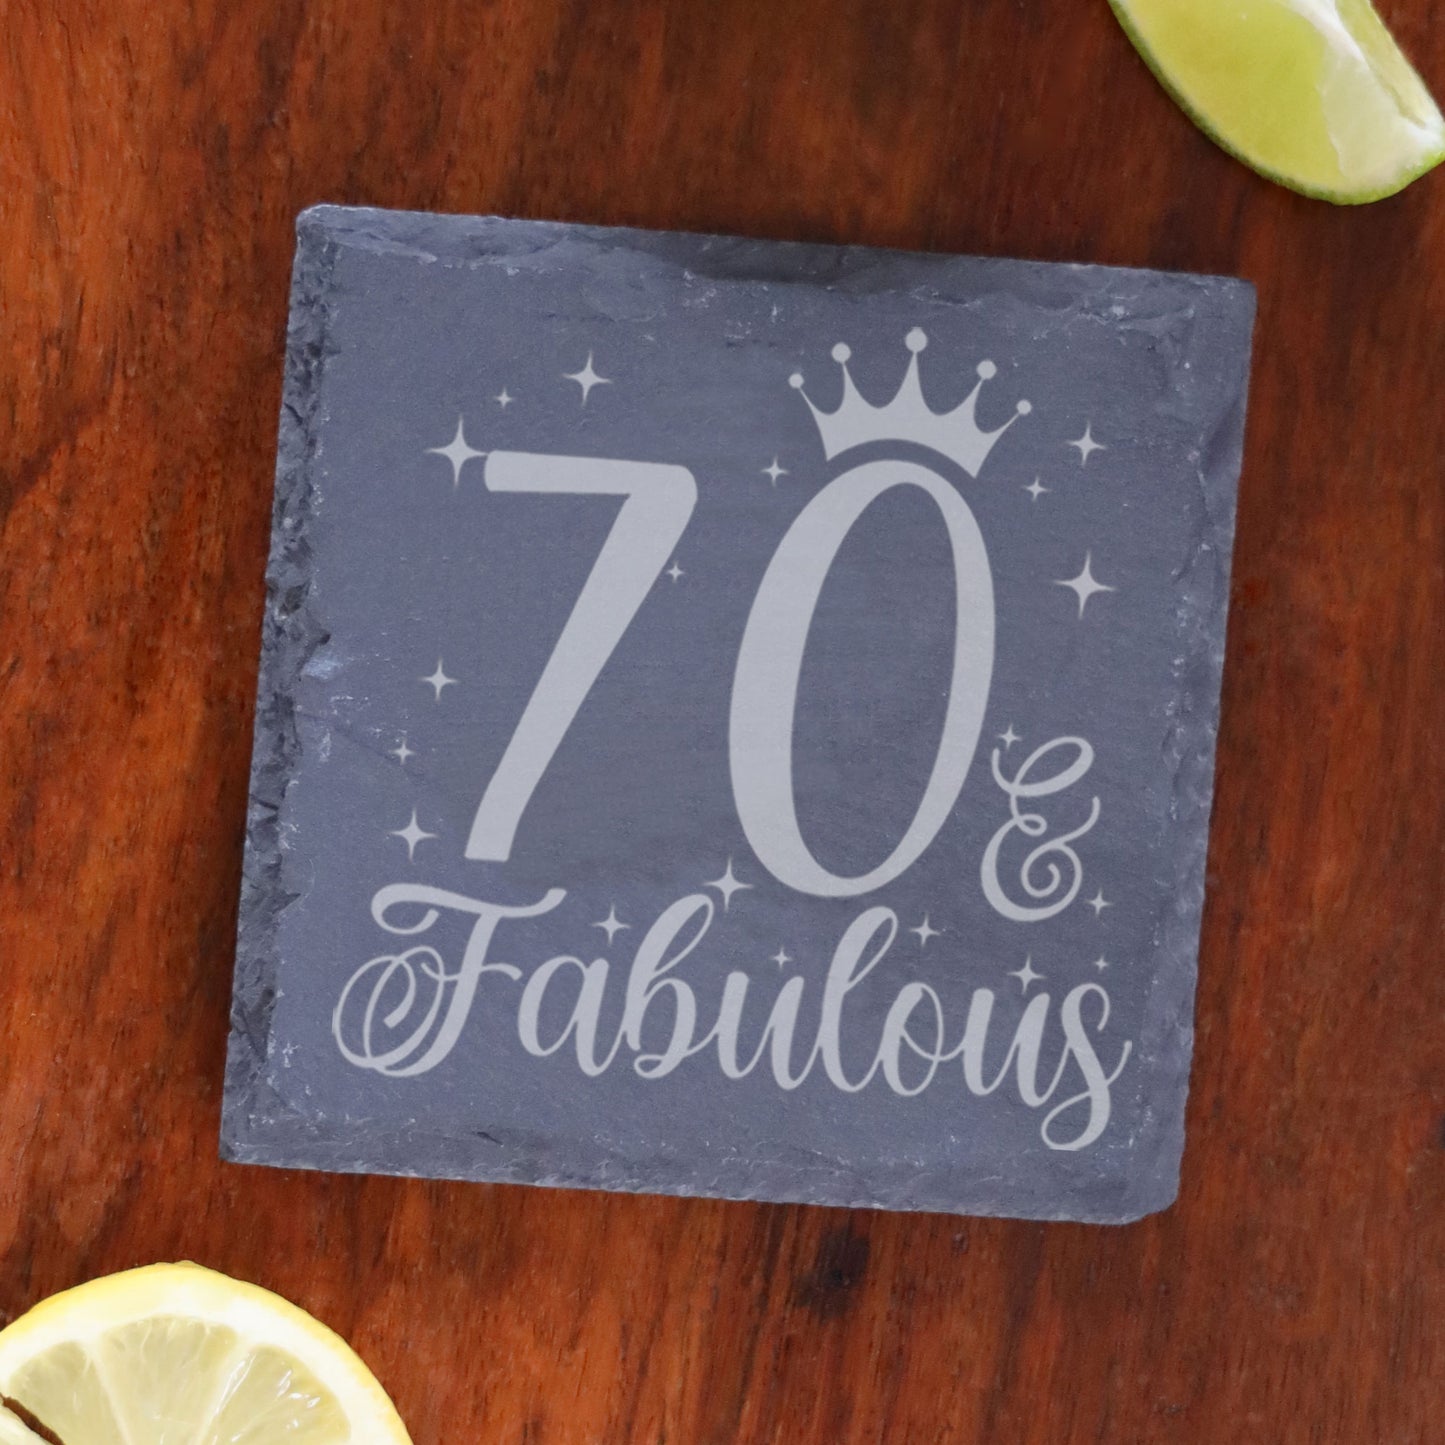 70 & Fabulous 70th Birthday Gift Engraved Wine Glass and/or Coaster Set  - Always Looking Good - Square Coaster Only  